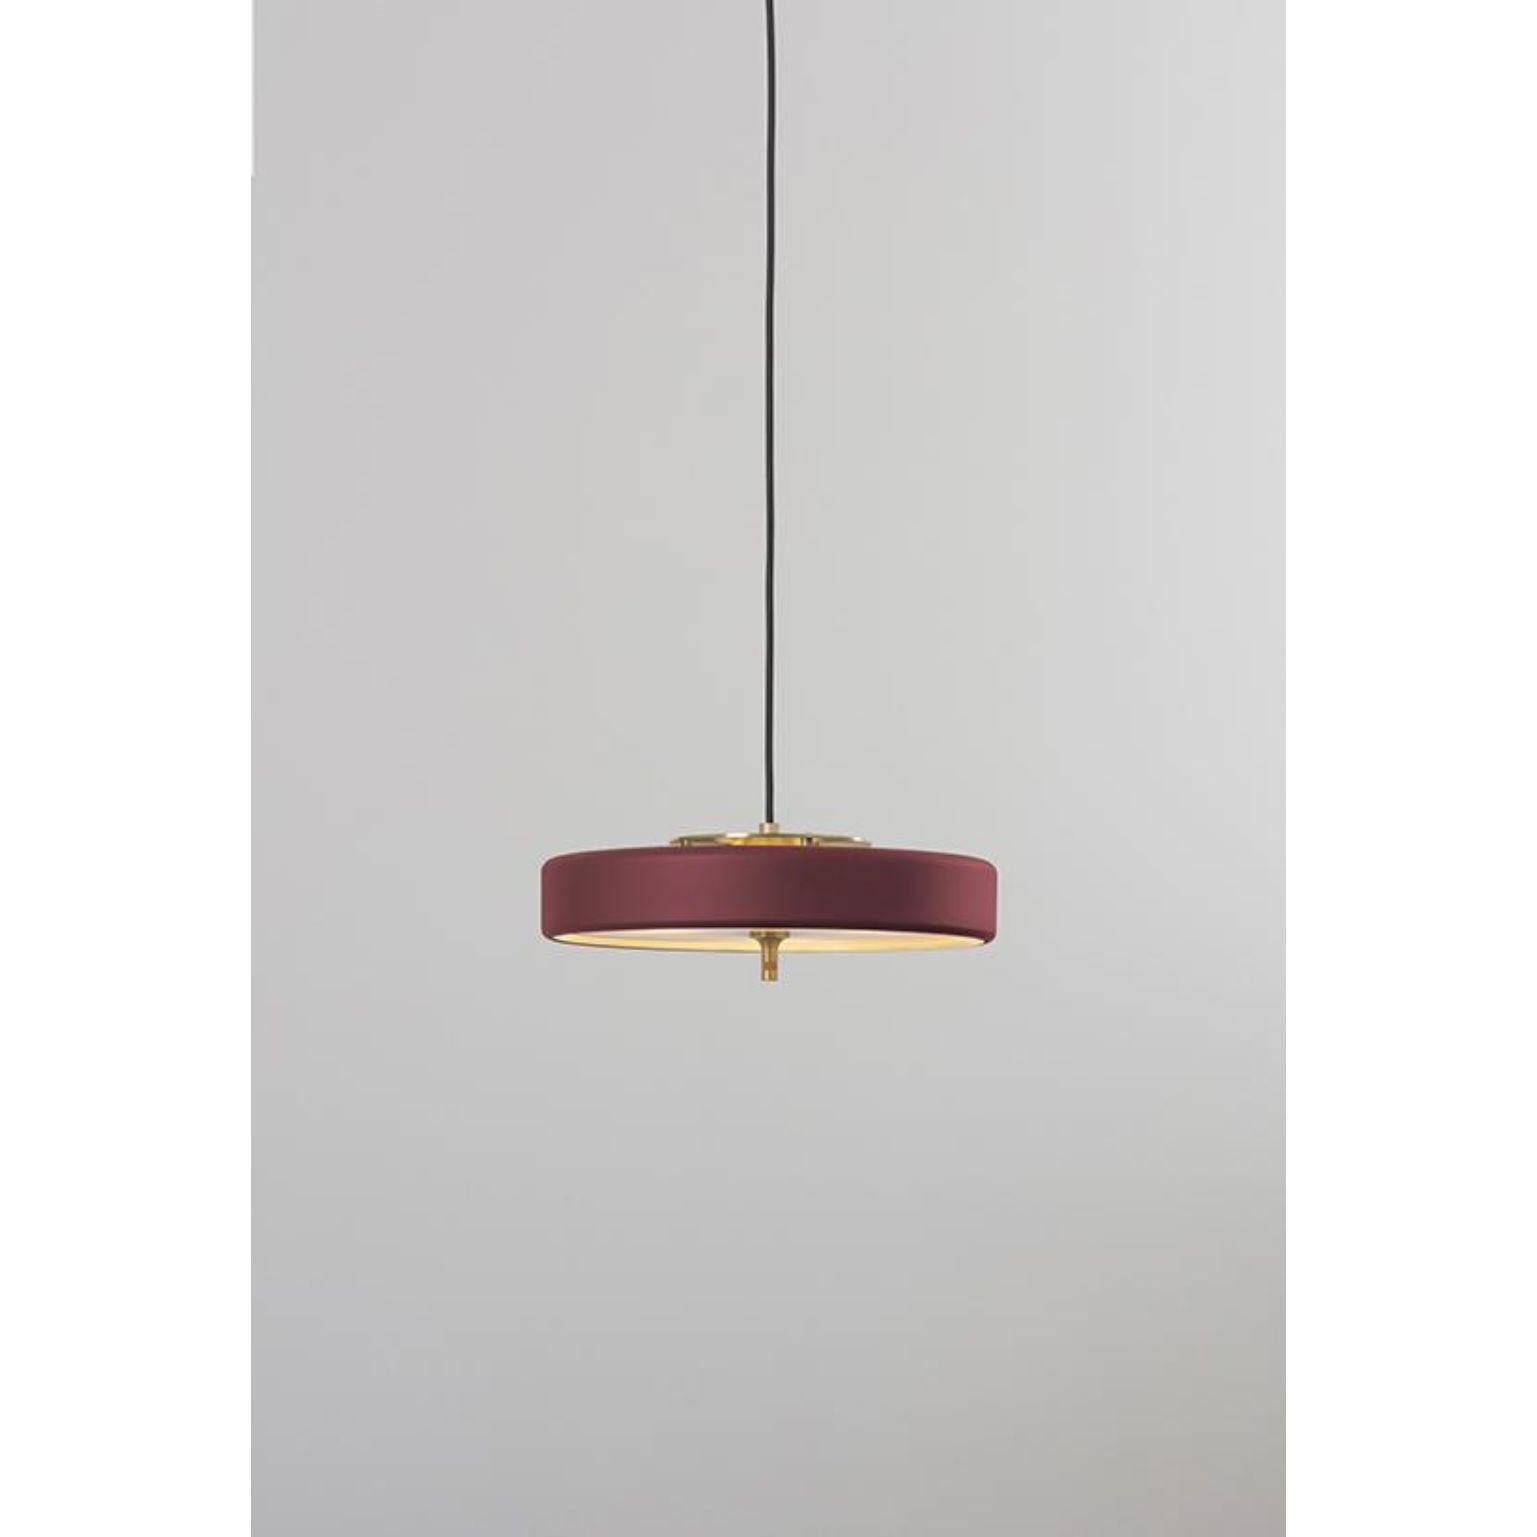 Revolve pendant light - Brushed brass - Oxblood by Bert Frank
Dimensions: 60-200 x 35 x 11 cm
Materials: Brass, steel

Also available in polished brass.

When Adam Yeats and Robbie Llewellyn founded Bert Frank in 2013 it was a meeting of minds and